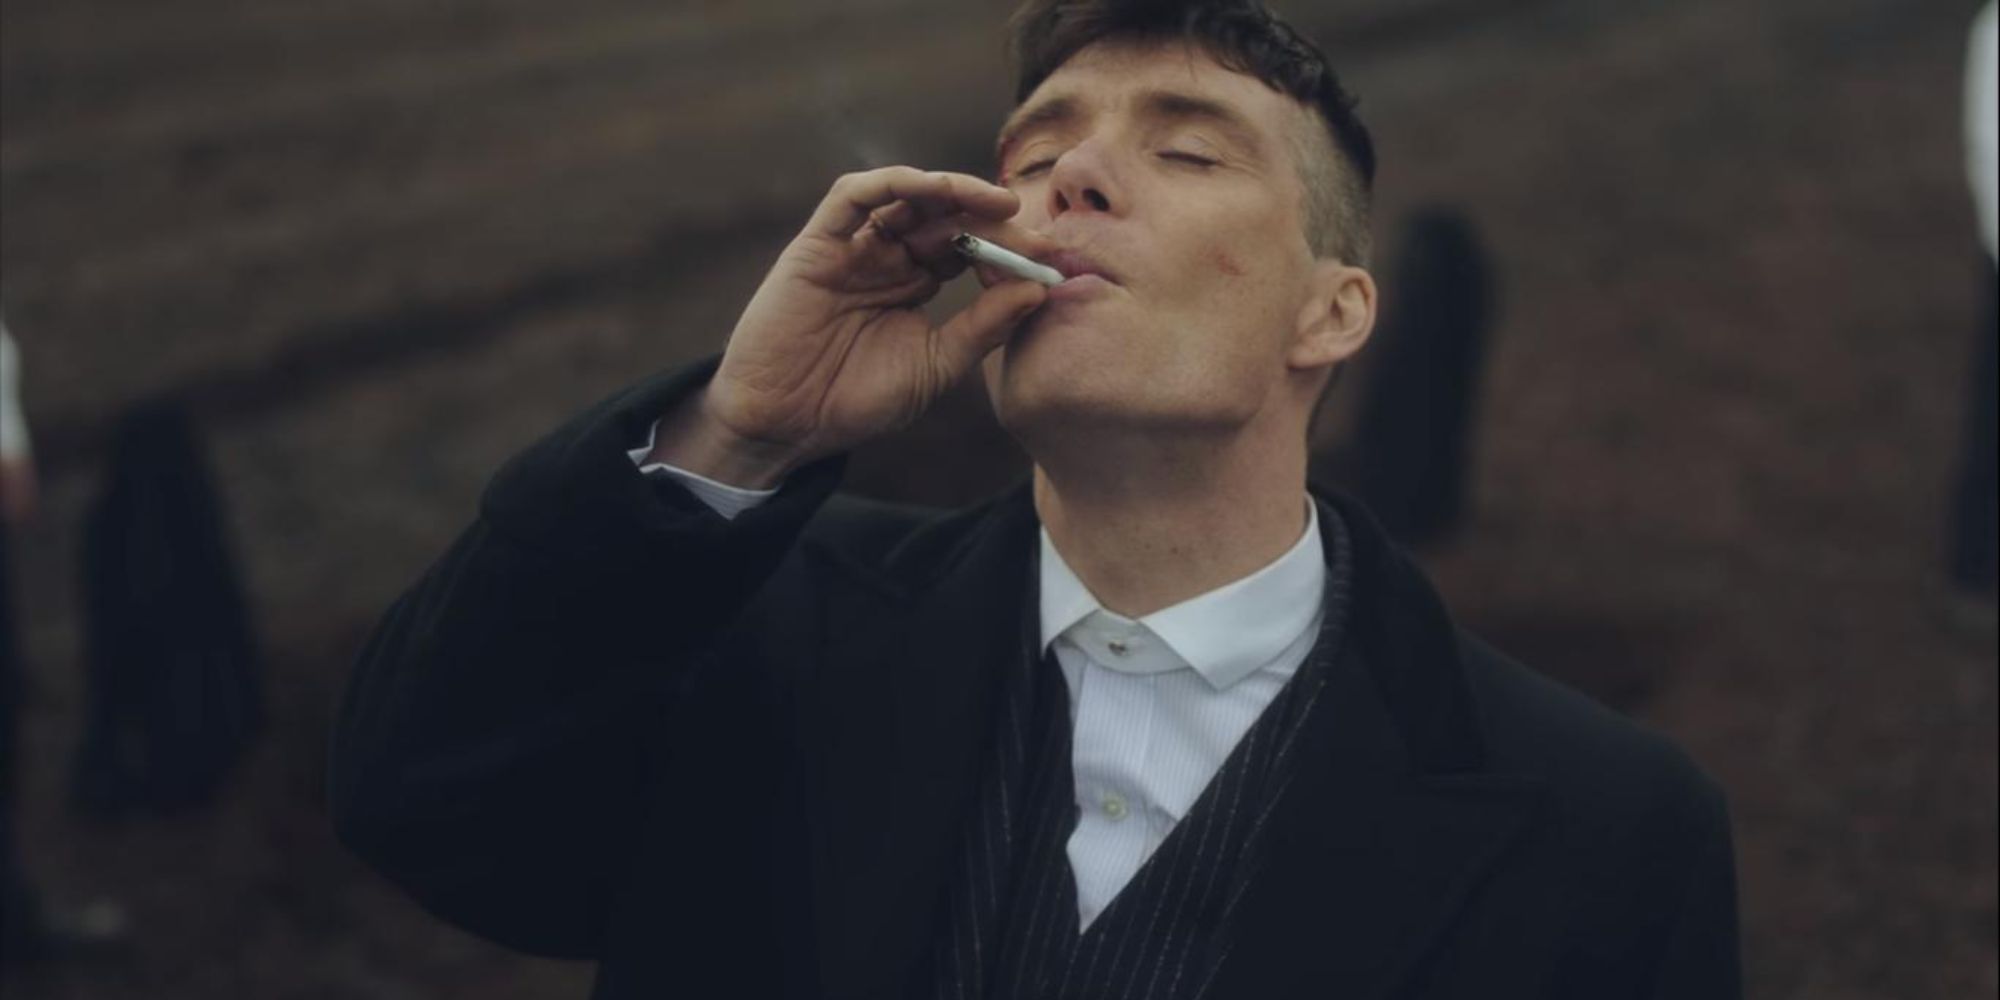 peaky blinders season 7: Peaky Blinders Season 7 update: Steven Knight  reveals details about shooting and his upcoming plans for the series - The  Economic Times